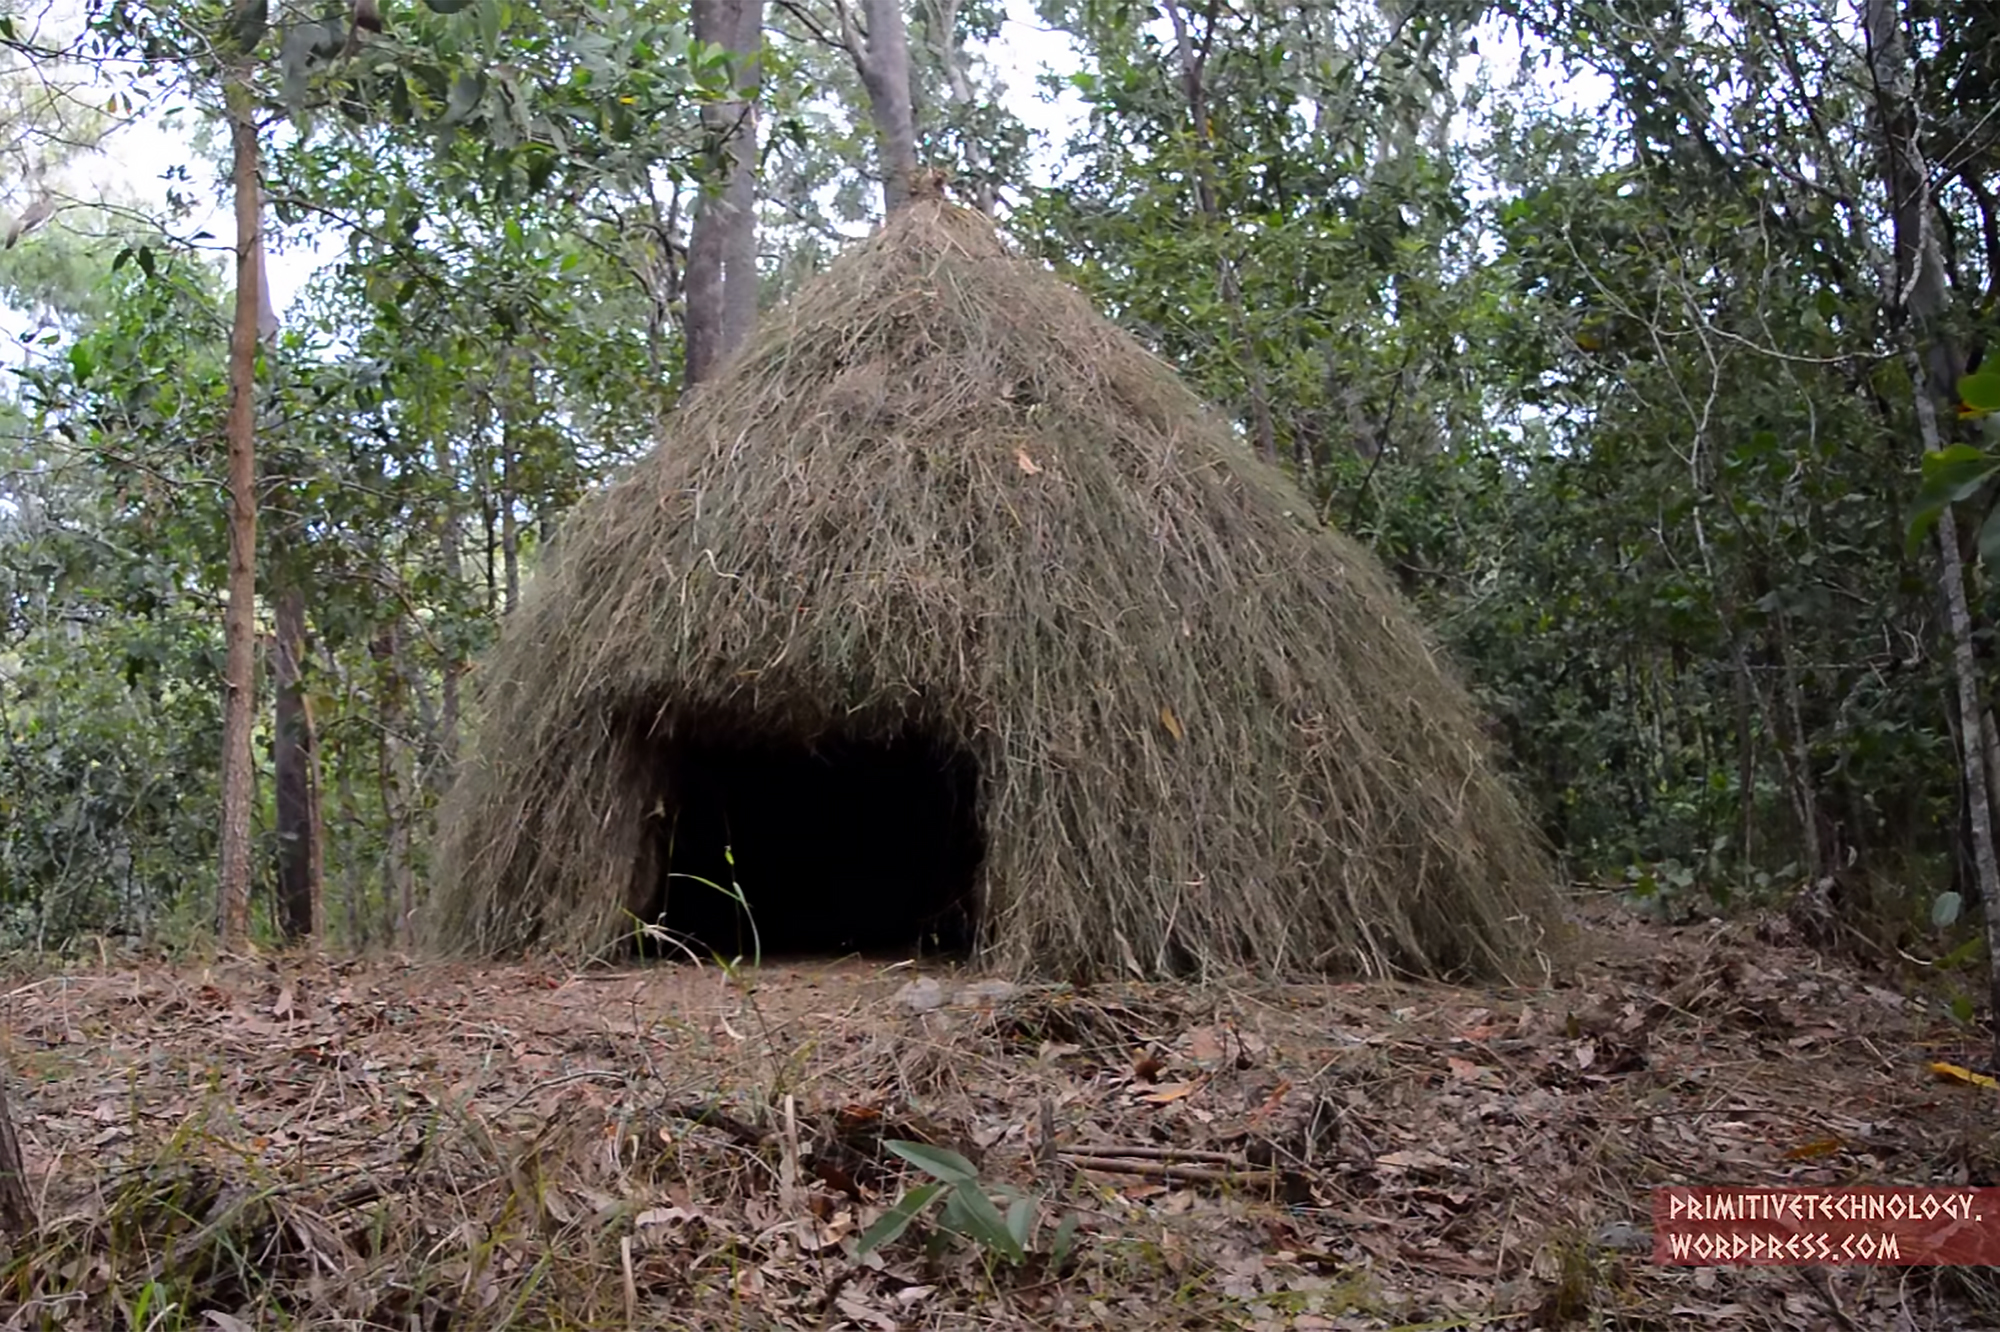 Primitive Technology: How to Build a Grass Hut | RECOIL OFFGRID